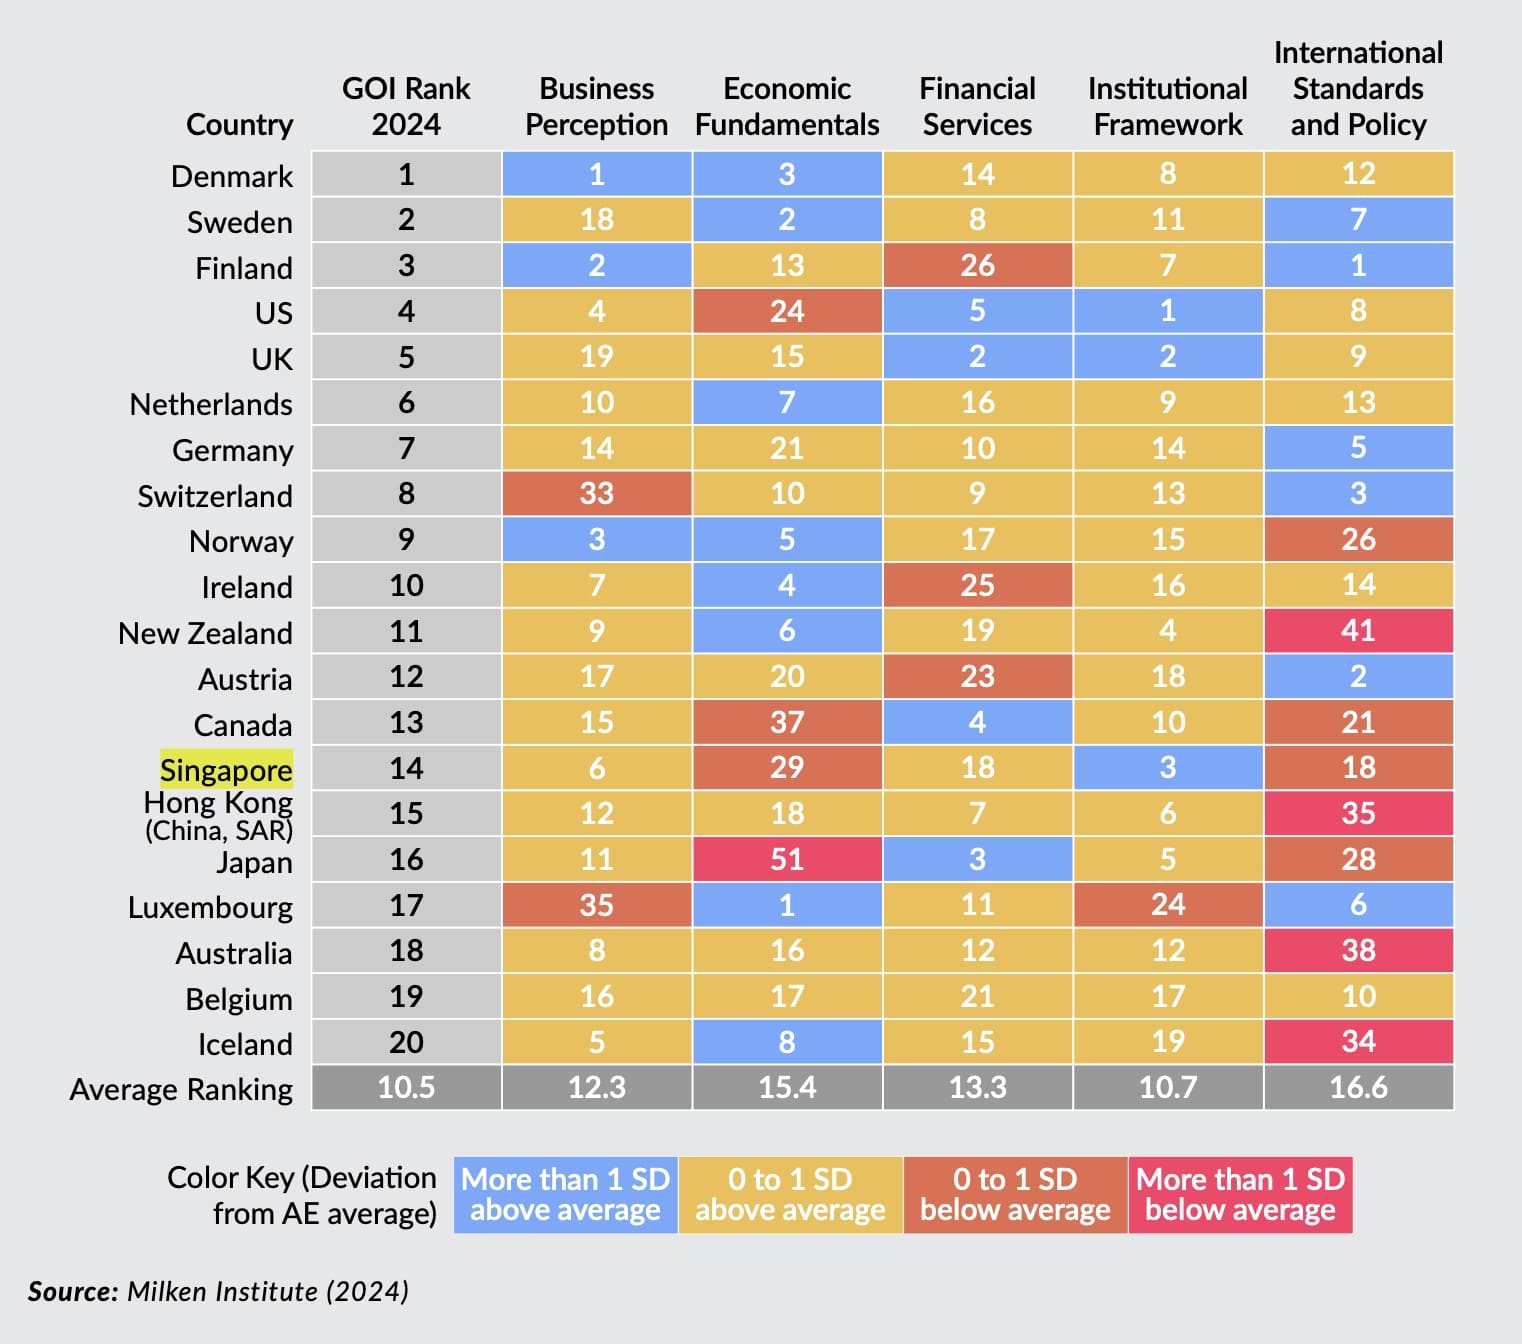 Global Opportunity Index Top 20 (GOI Rankings across GOI categories)